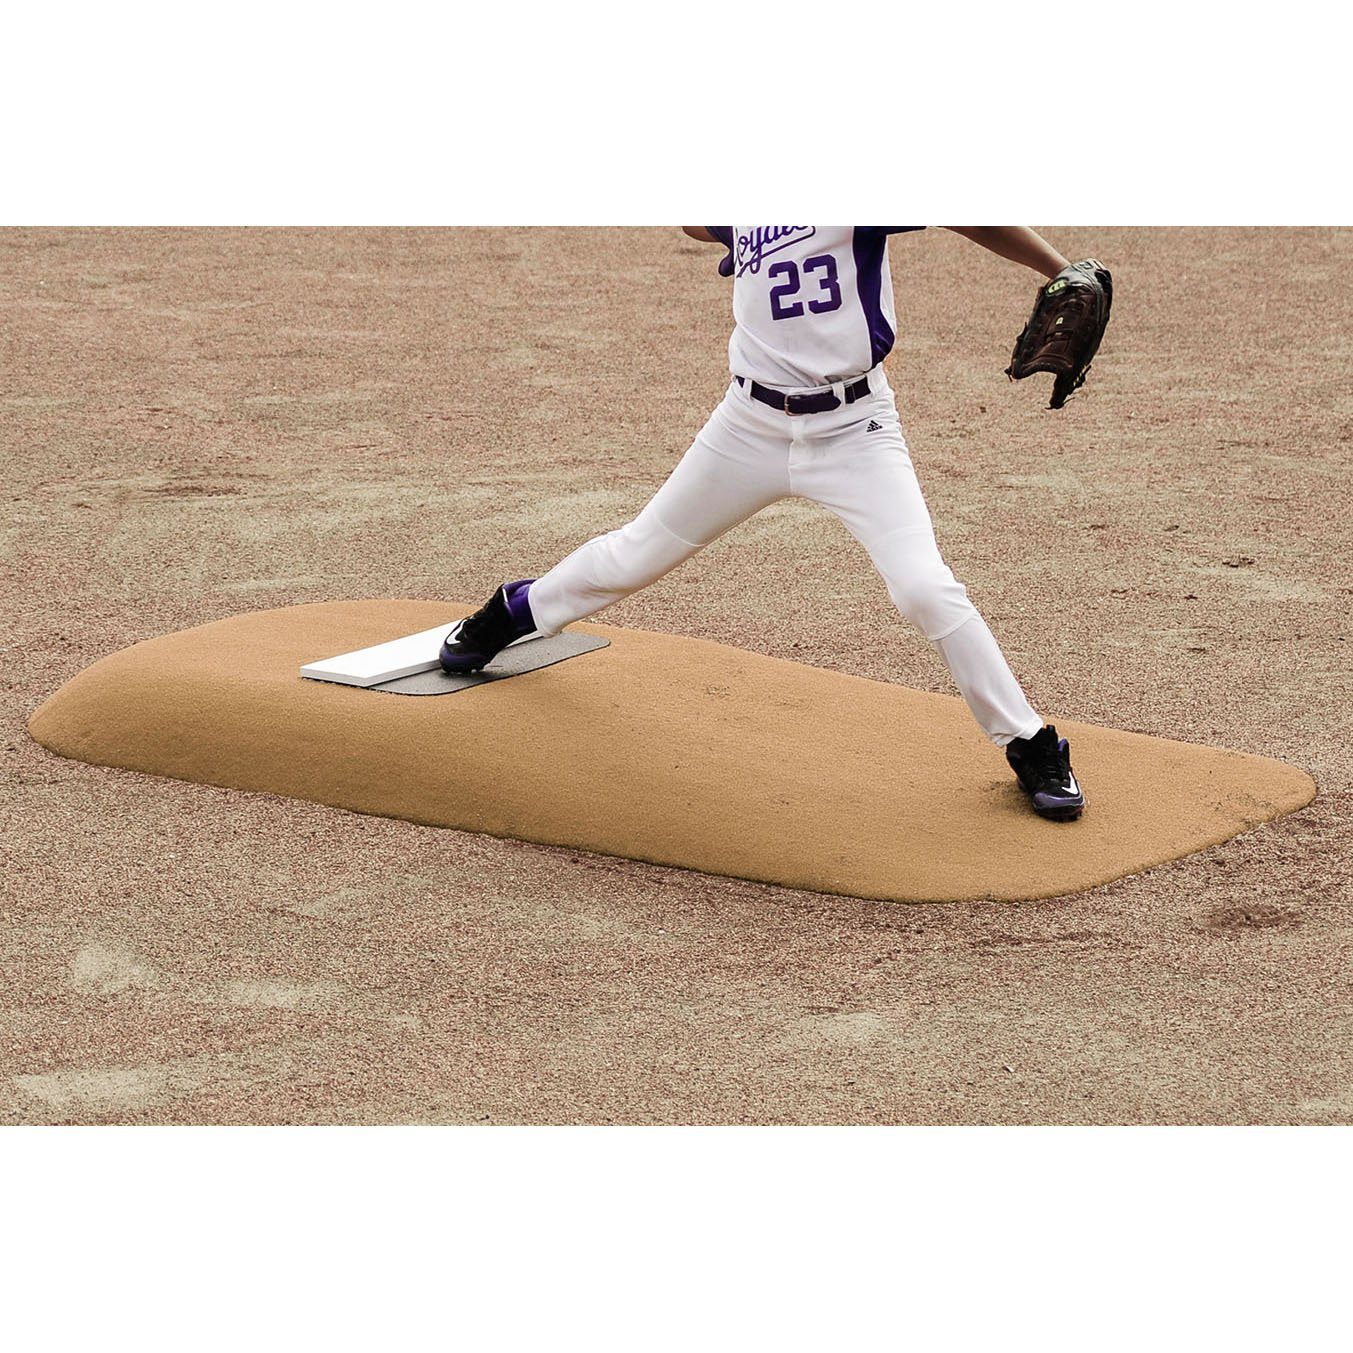 Pitch Pro 486 Portable Youth Game Pitching Mound